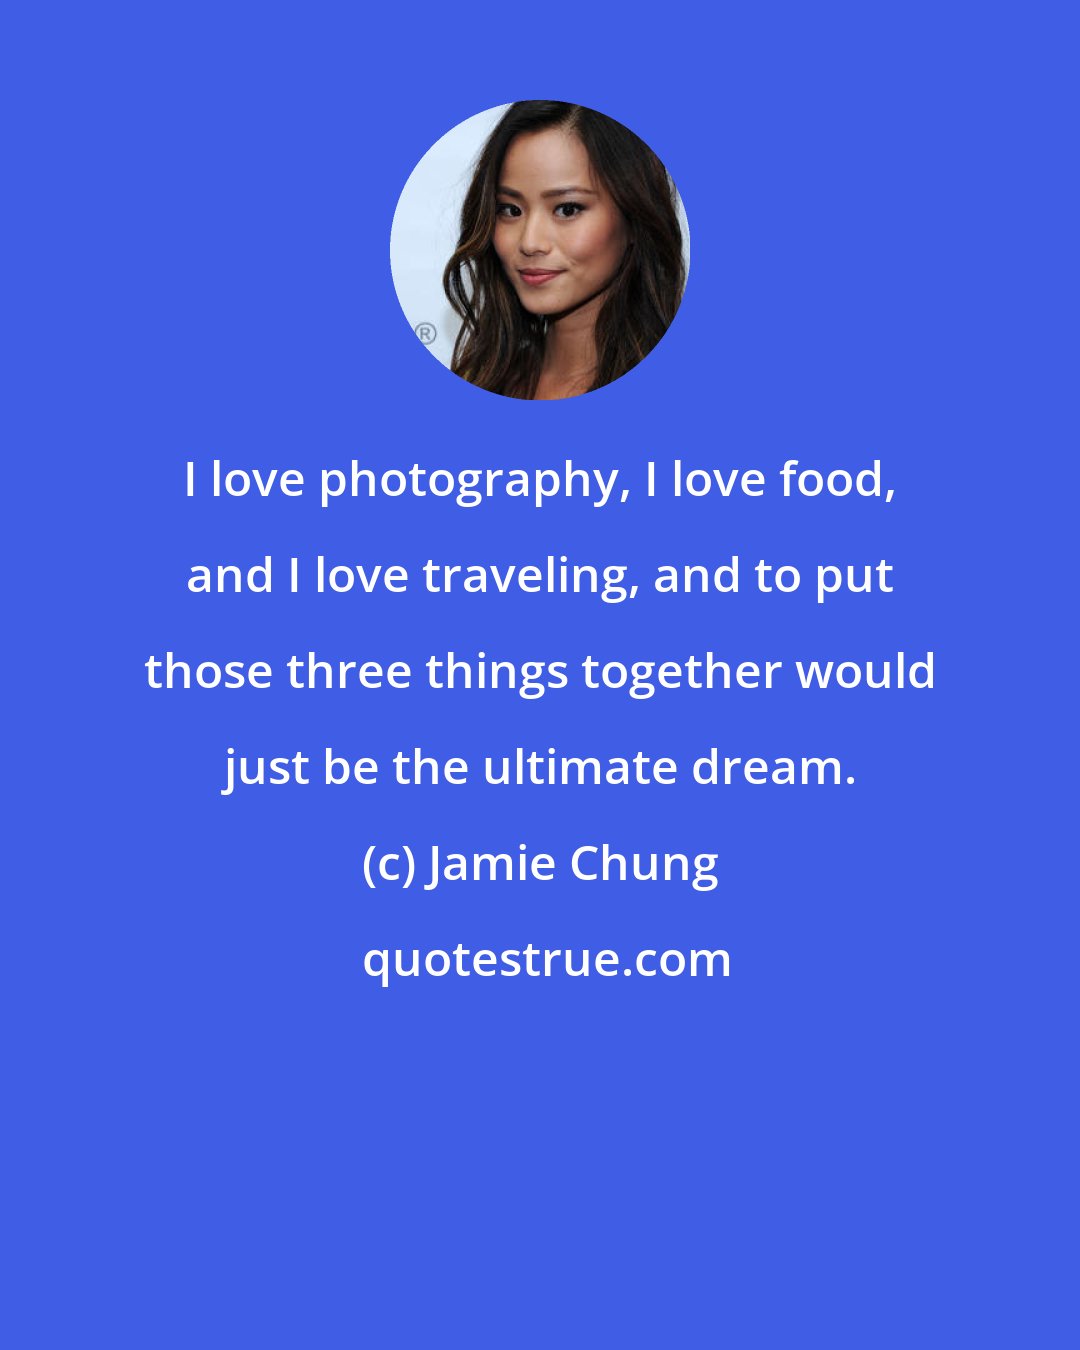 Jamie Chung: I love photography, I love food, and I love traveling, and to put those three things together would just be the ultimate dream.